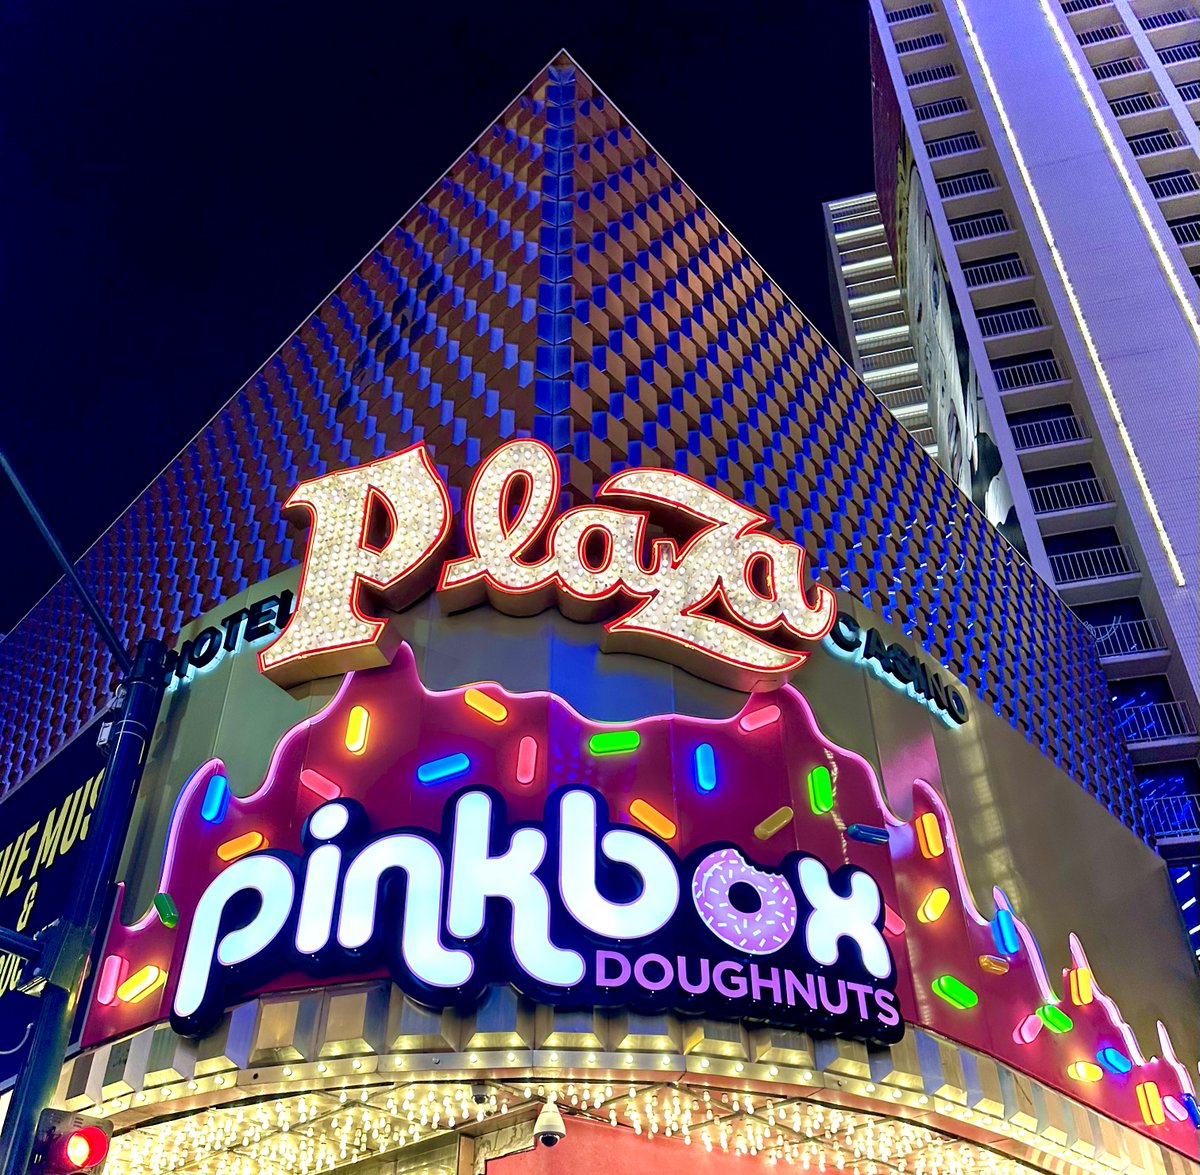 Happy National Donut Day! Come to the grand opening of @Pinkboxdoughnut at the Plaza on June 10th for the Reimagination of Main Street!🍩✨

ow.ly/EGSn50OEEEH
#PlazaLV #Vegas #DTLV #FremontStreet #OnlyVegas #Downforanythingdtlv #Pinkboxdoughnuts